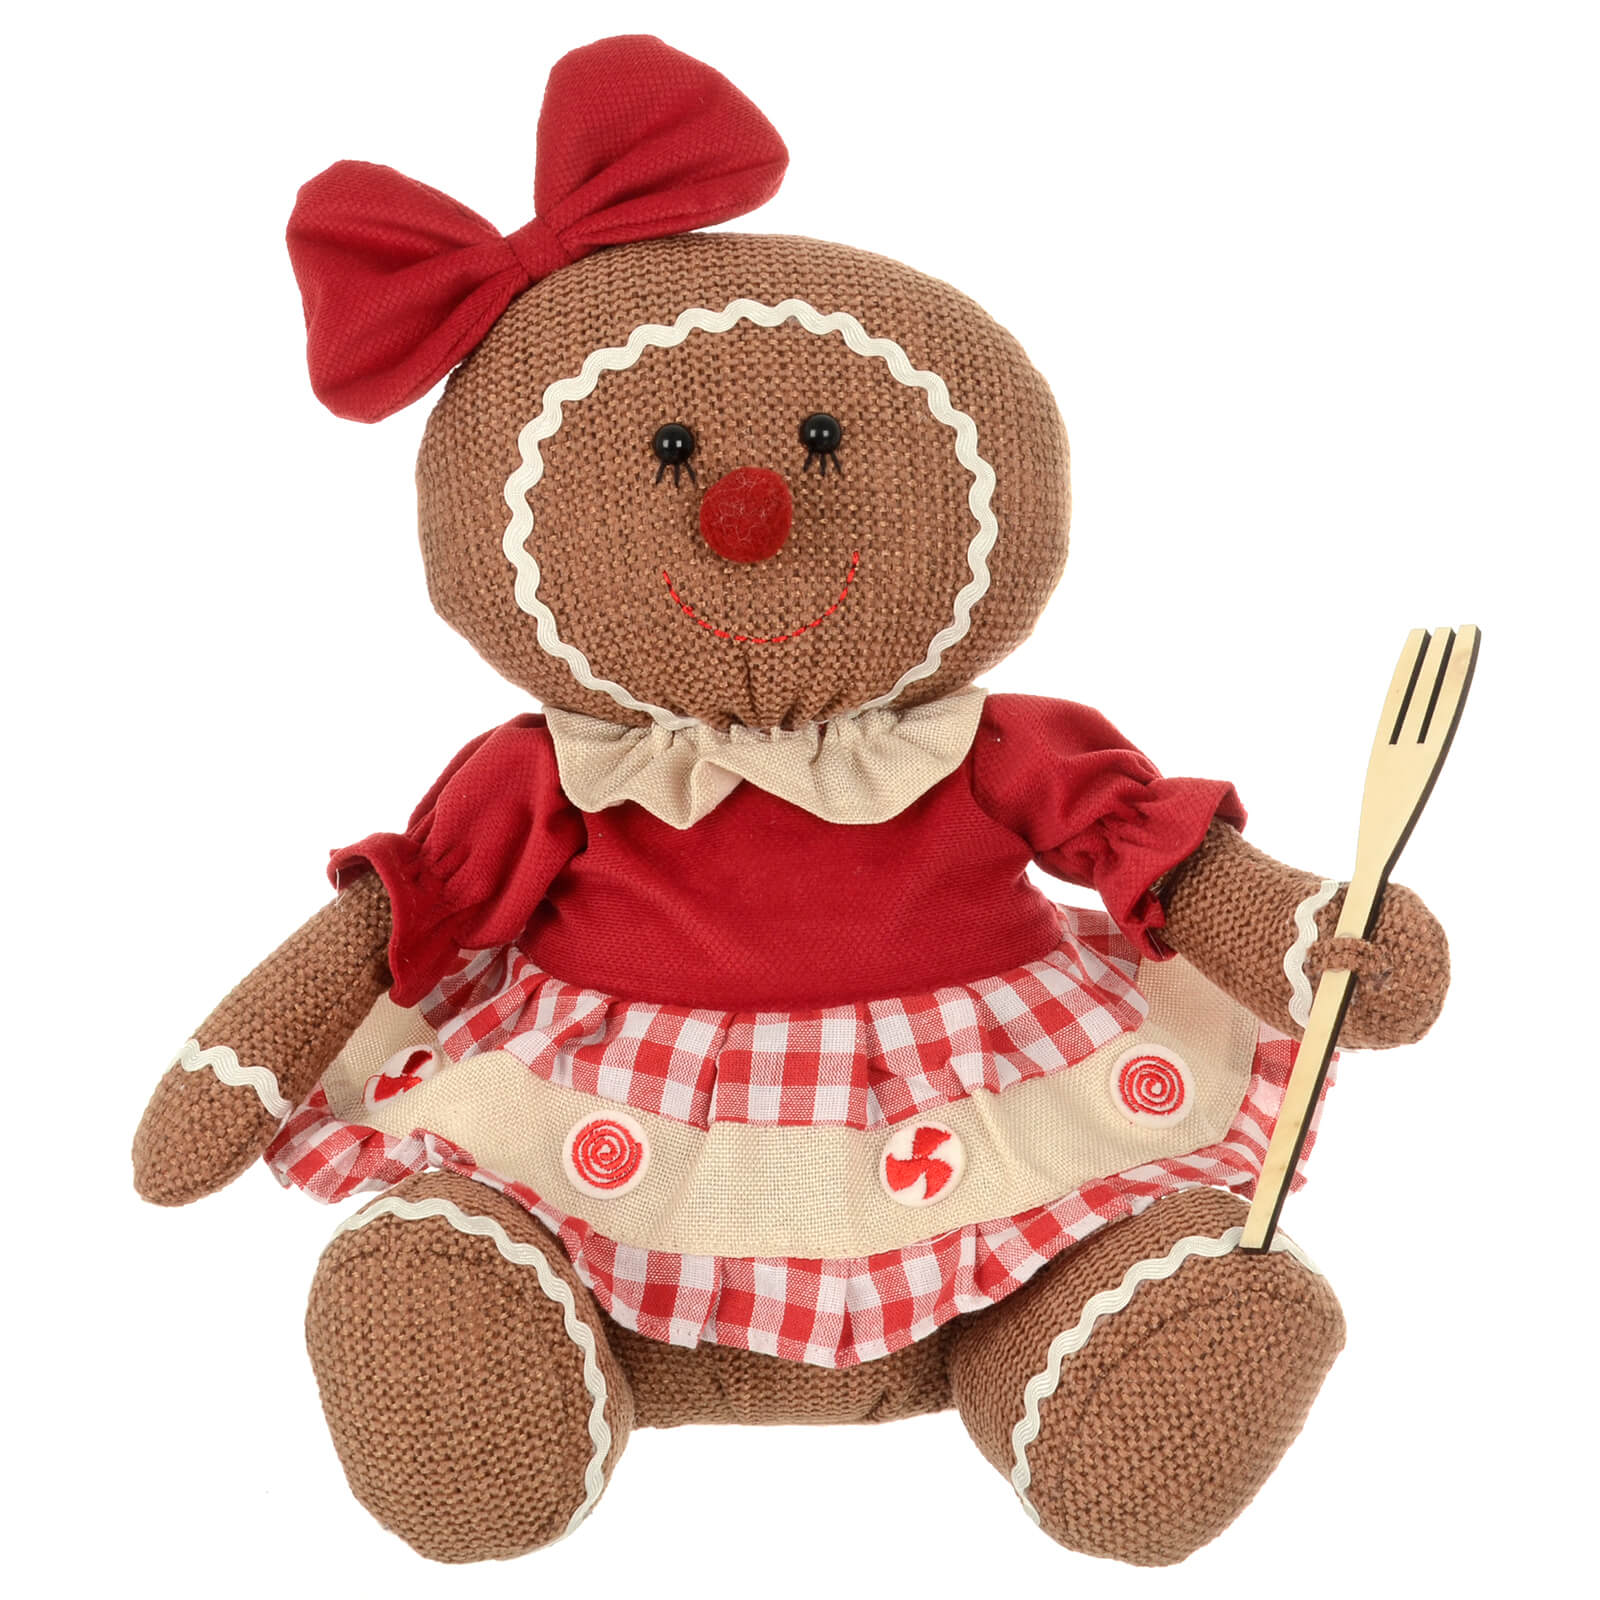 Gingerbread lady figure 33cm with fork